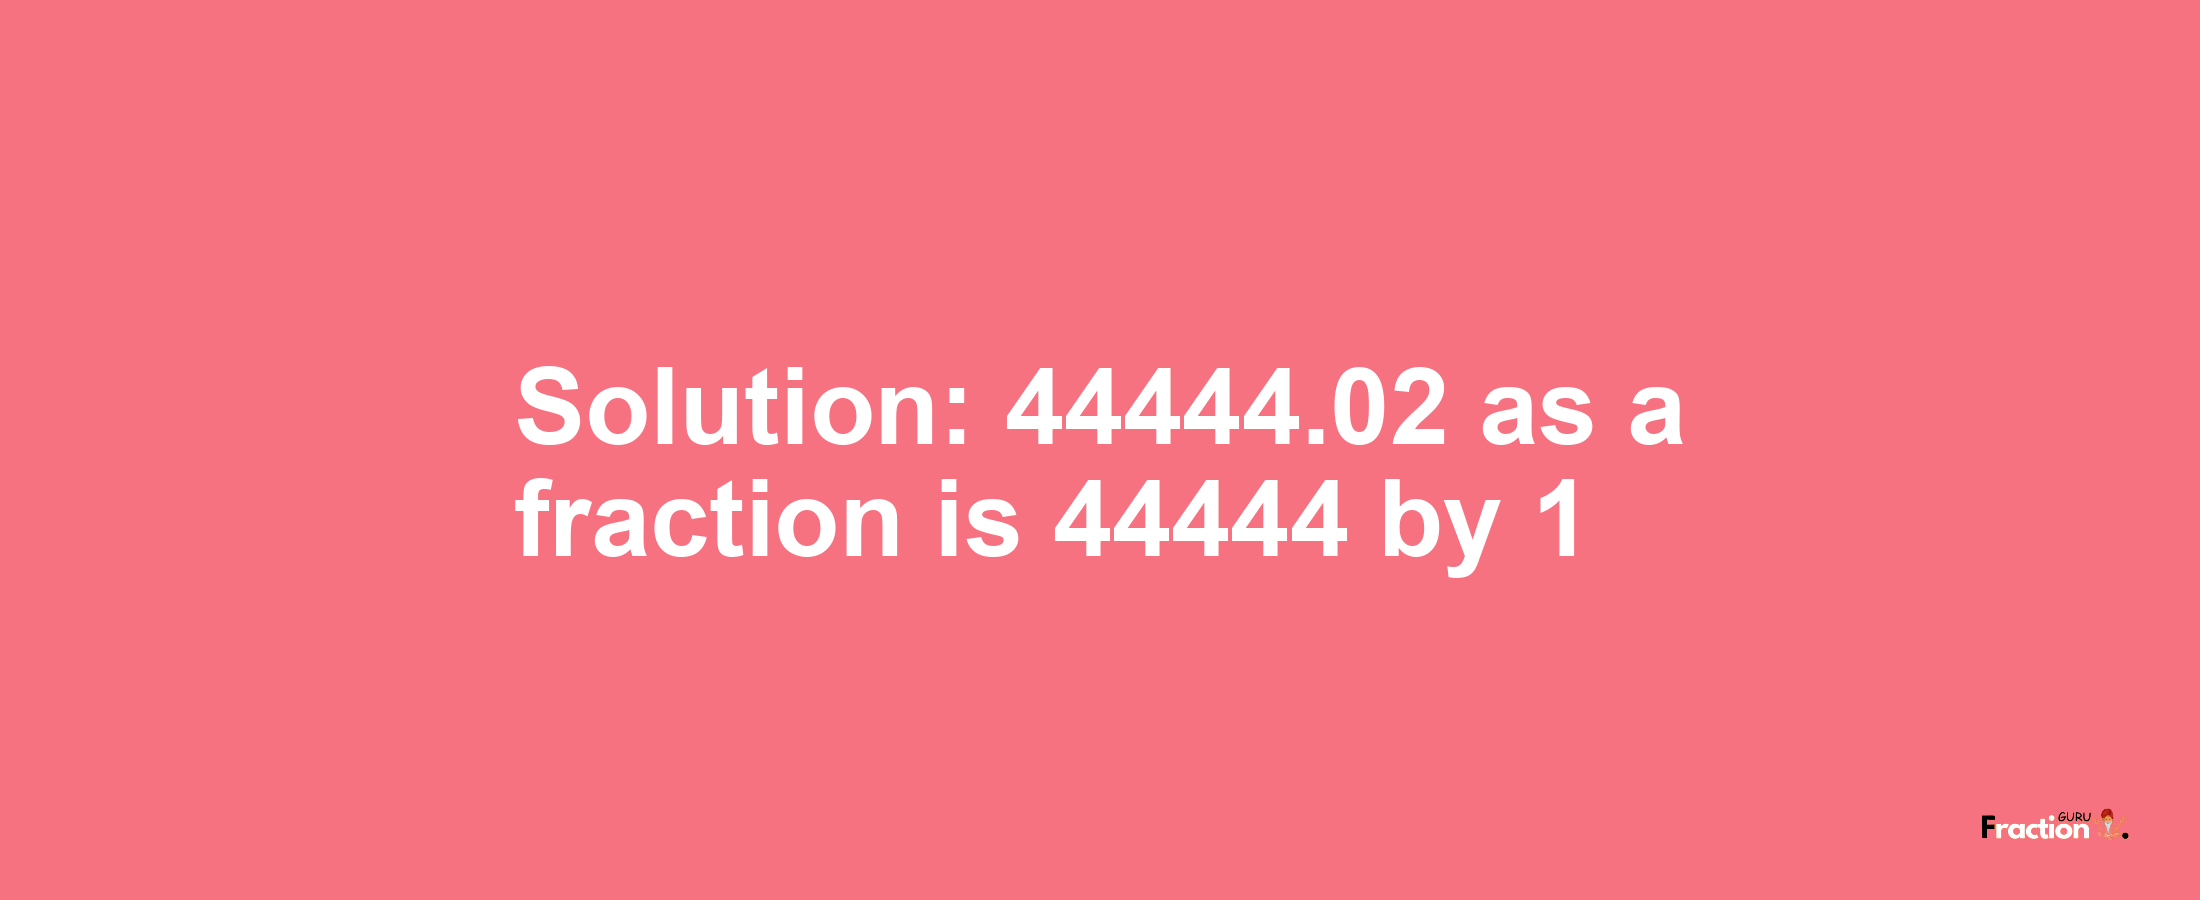 Solution:44444.02 as a fraction is 44444/1